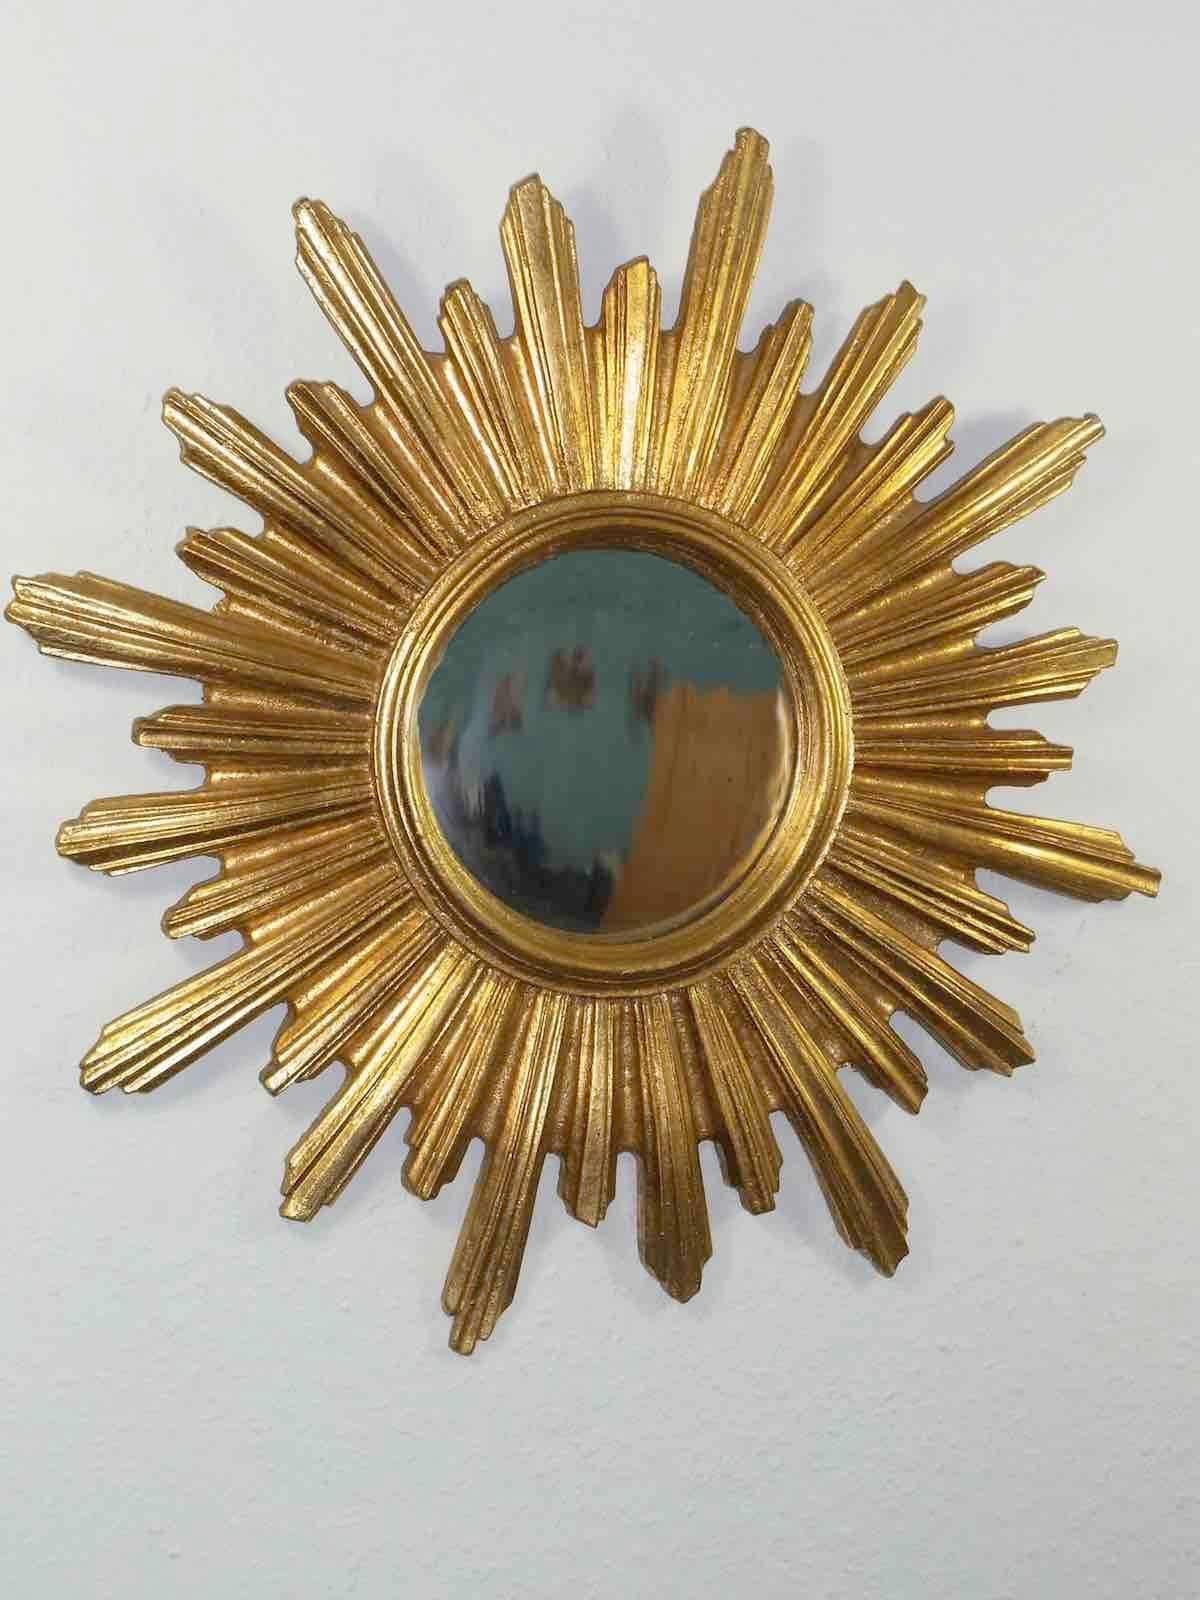 Gorgeous starburst mirror. 
Made of gilded Resin.
No chips, no cracks, no repairs.
Probably little dusty, but this is old-age.
It Measures approximate 21" in diameter,
Mirror only is approximate 6 1/4" in diameter.
It stands